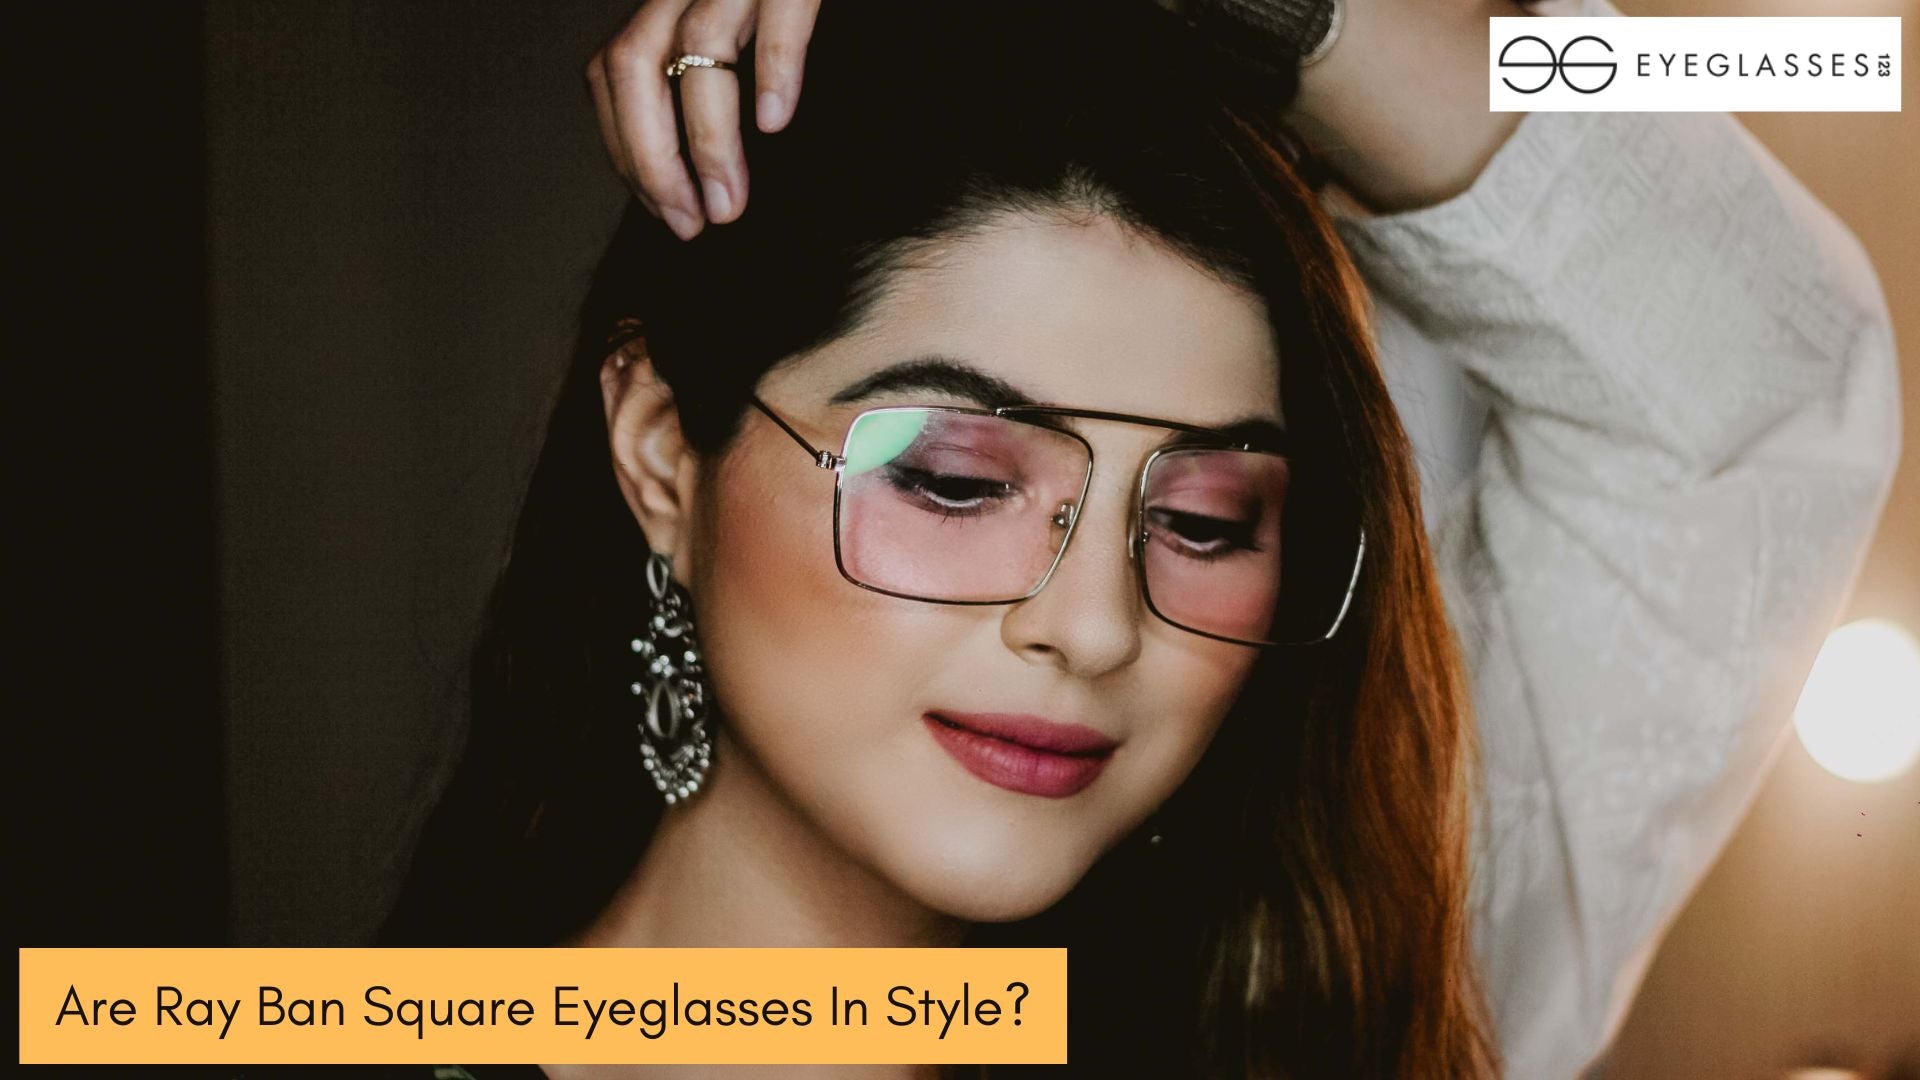 Are Ray Ban Square Eyeglasses In Style?